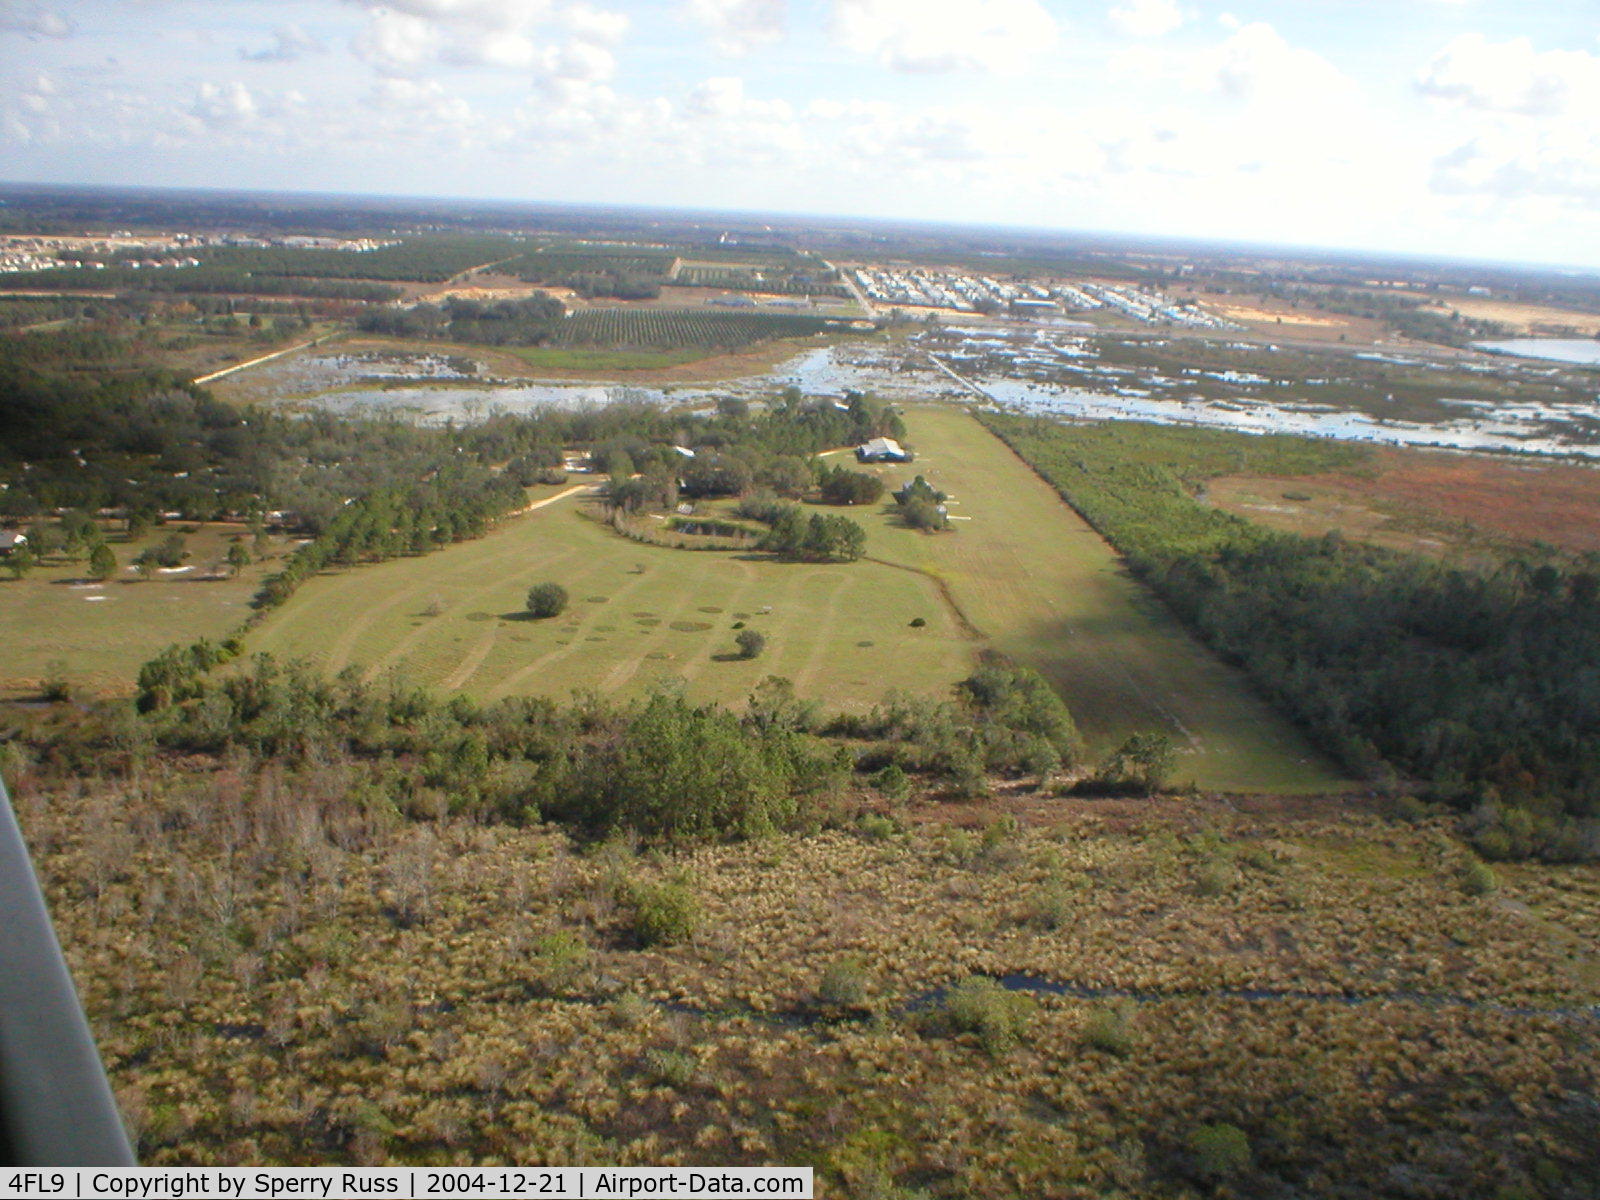 Gore Airport (4FL9) - Gore Private Airport between Haines City and Davenport, FL. Near U.S. 27